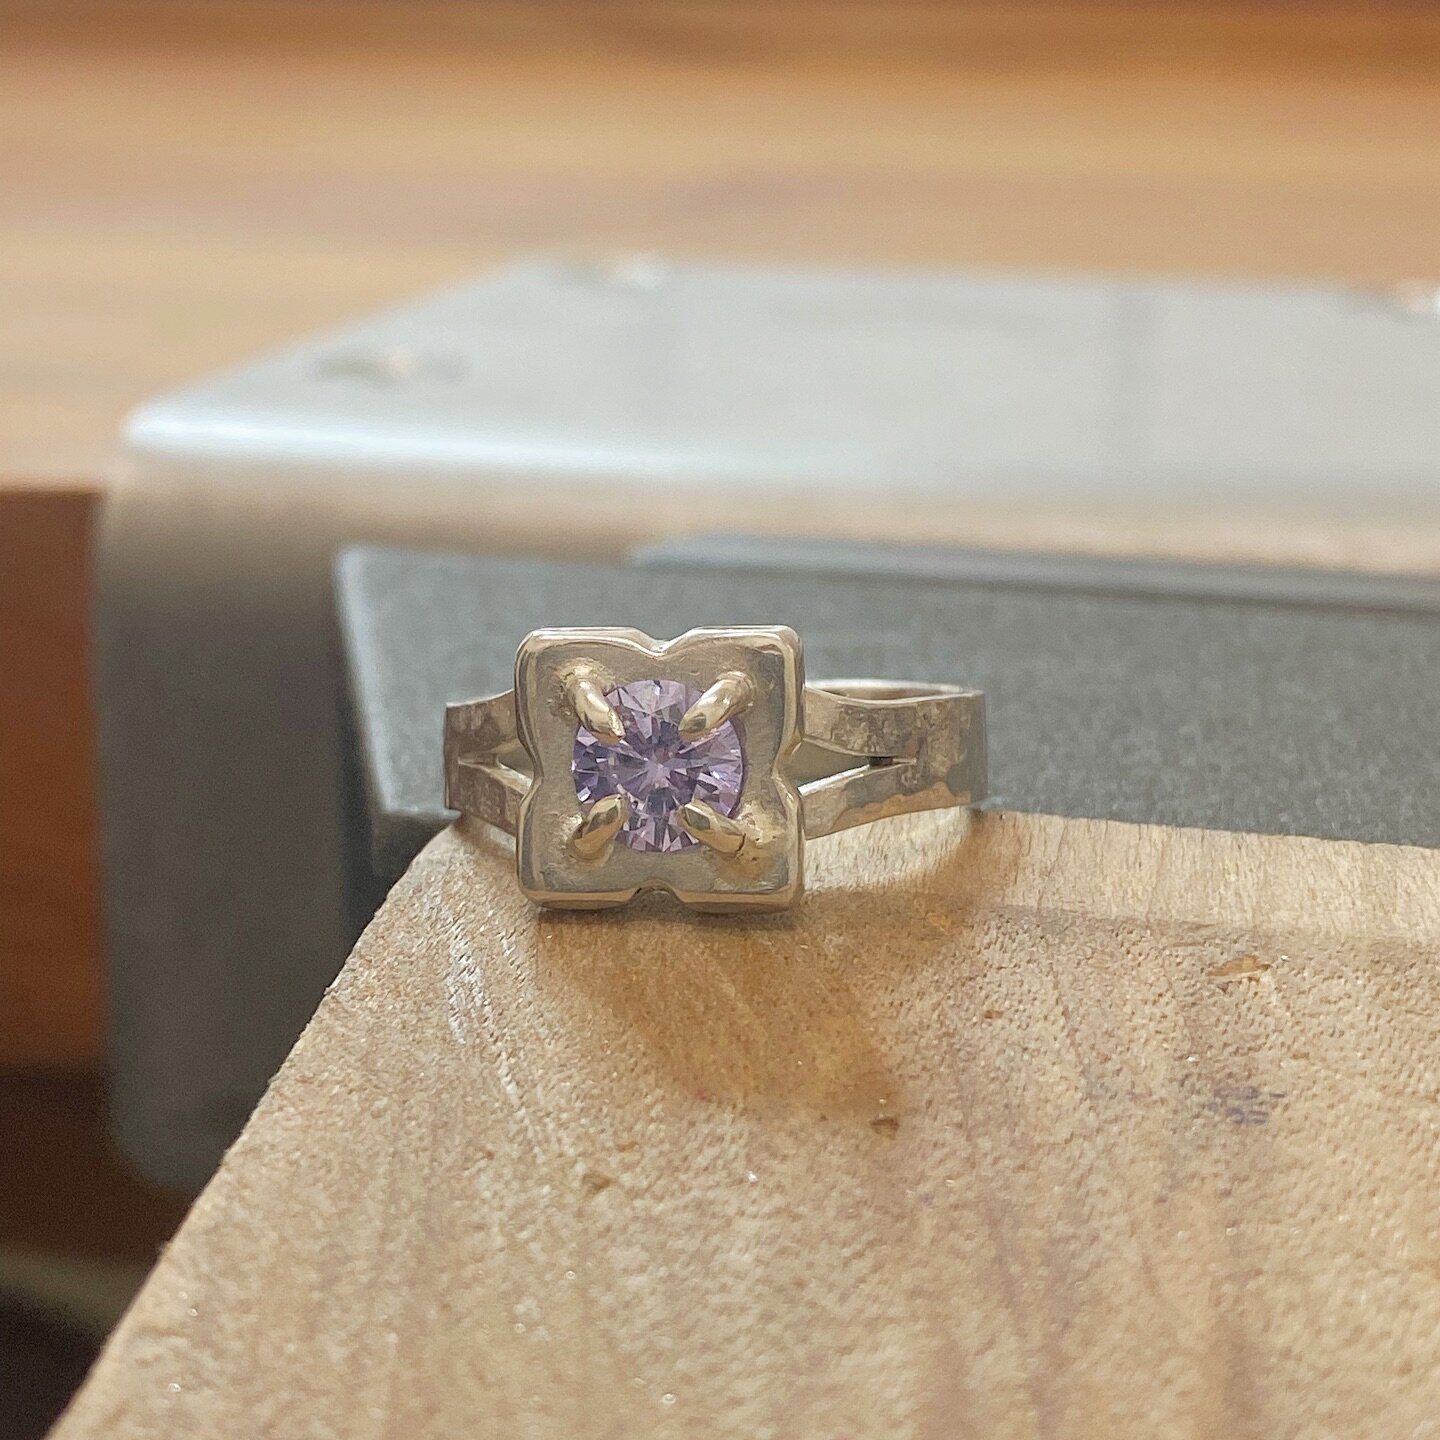 Sundays are bench days.

Yesterday I managed to spend a couple of hours at the bench, finishing up this little ring for my @jewellersacademy Advanced Diploma. 

Made from sterling silver, the textured split shank band is set with a purple cubic zirco